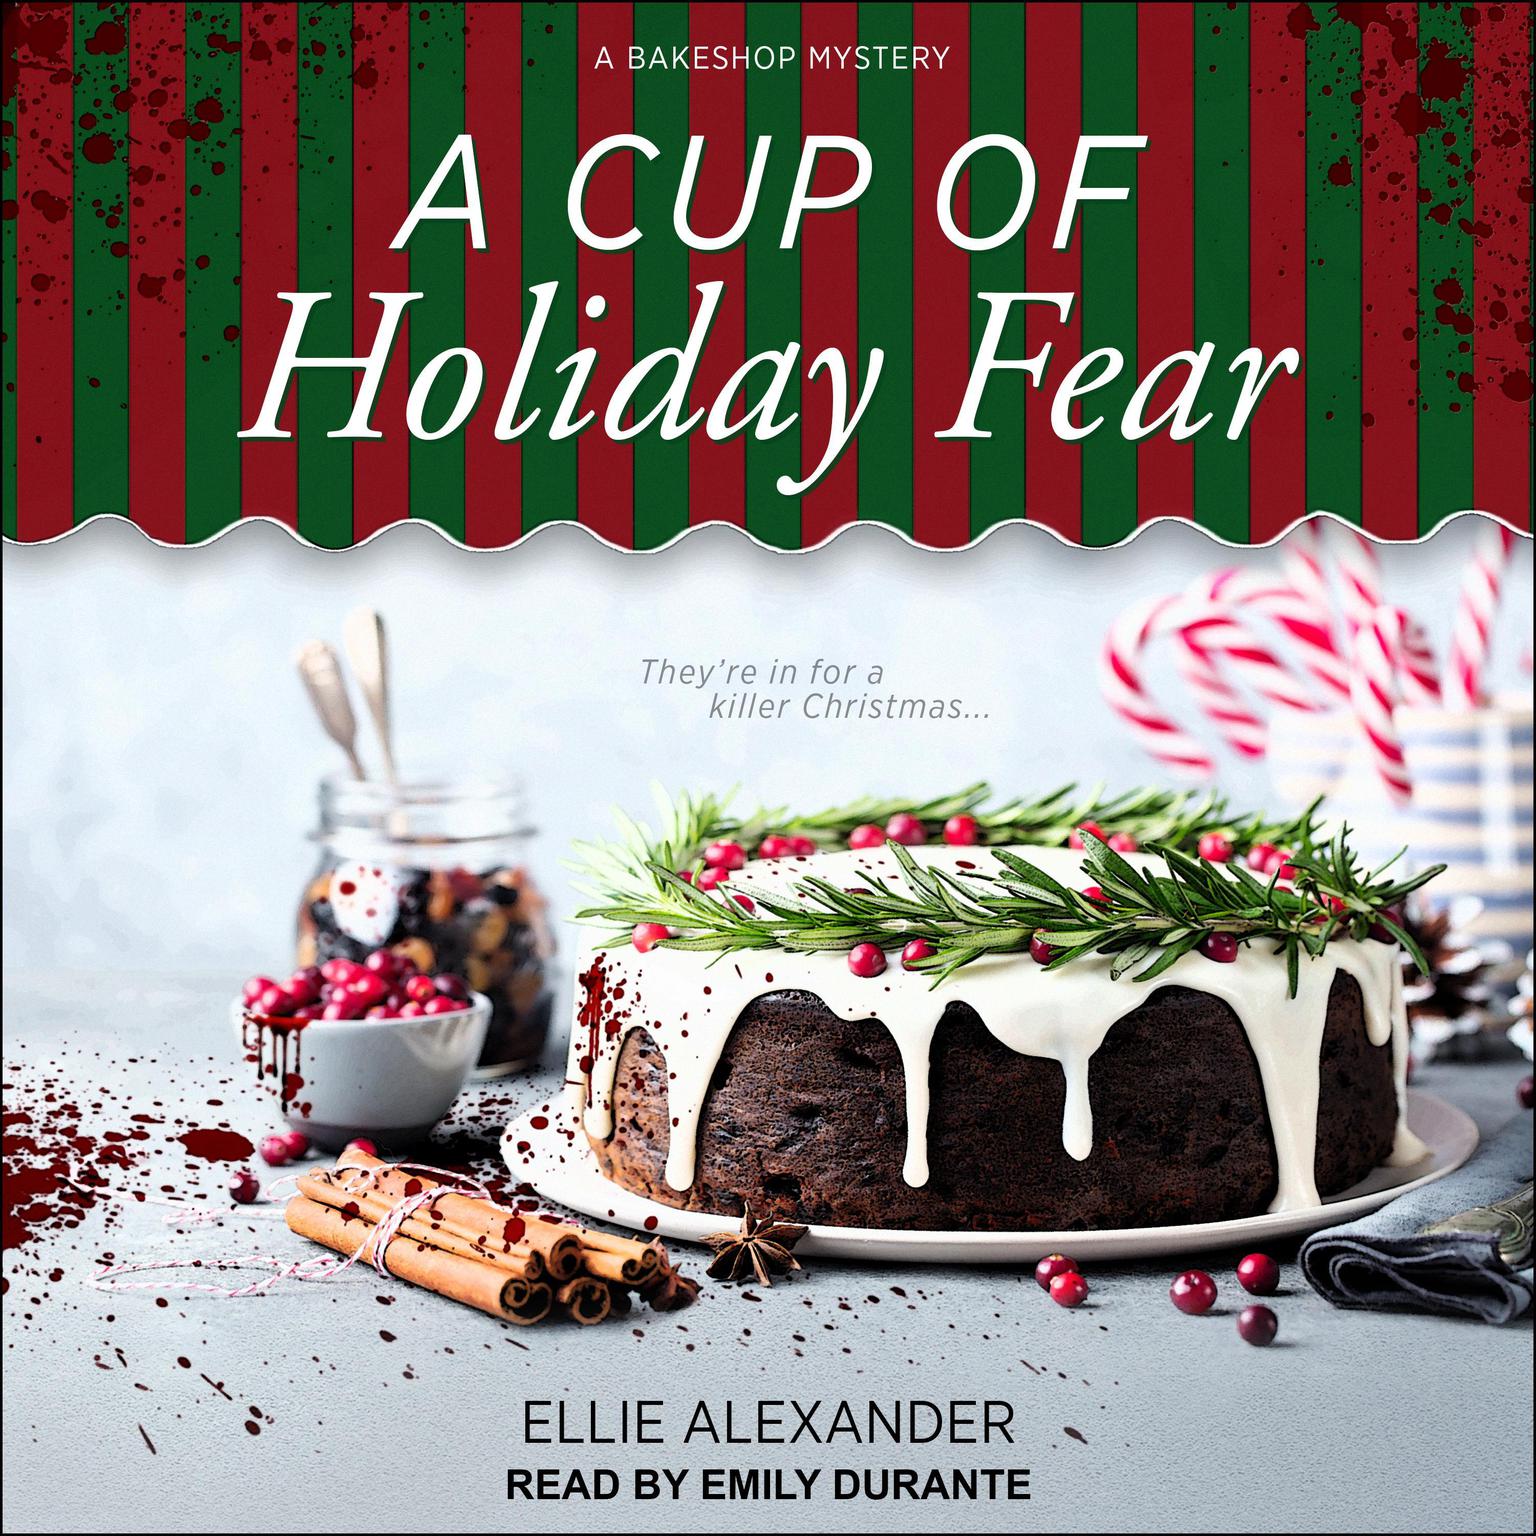 A Cup of Holiday Fear Audiobook, by Ellie Alexander